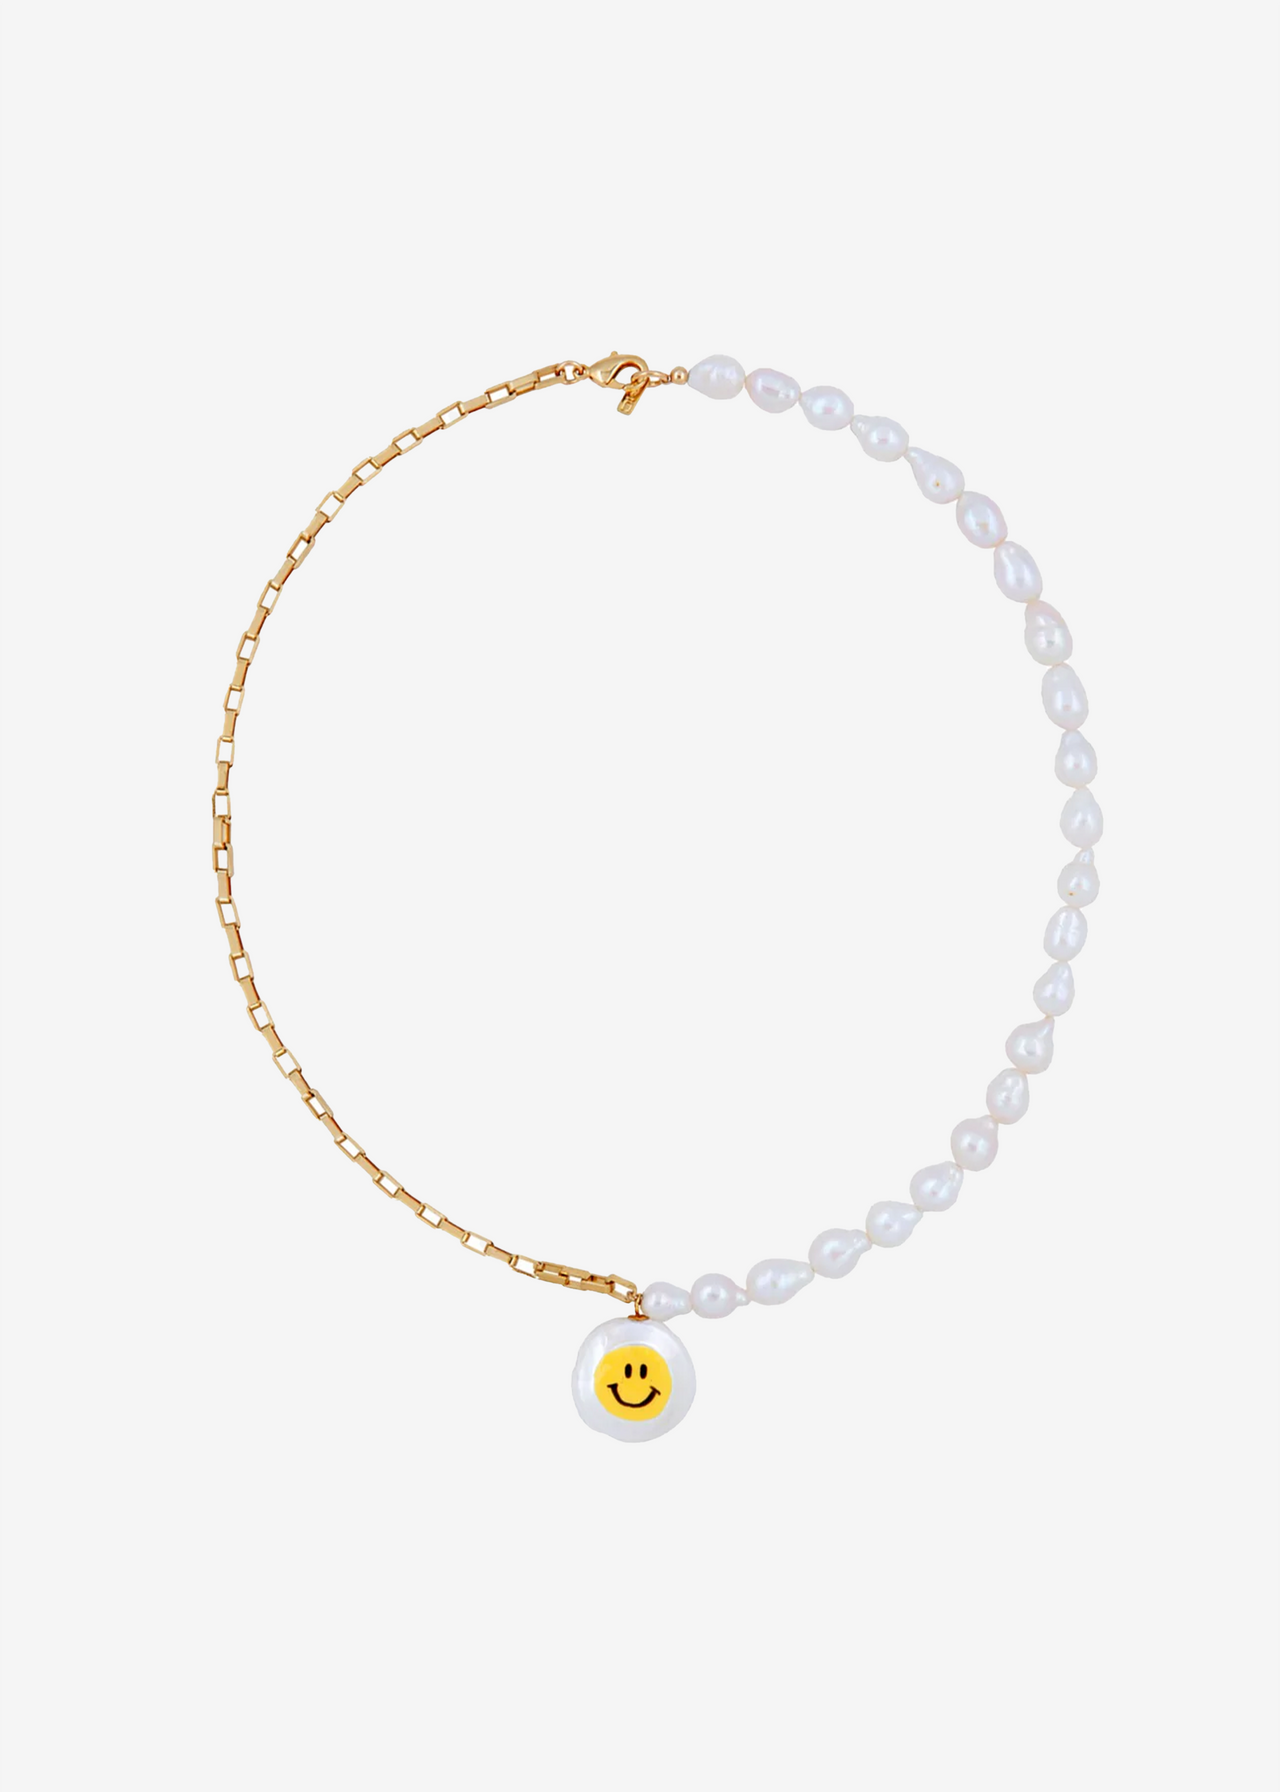 All Smiles Necklace 15" by Martha Calvo